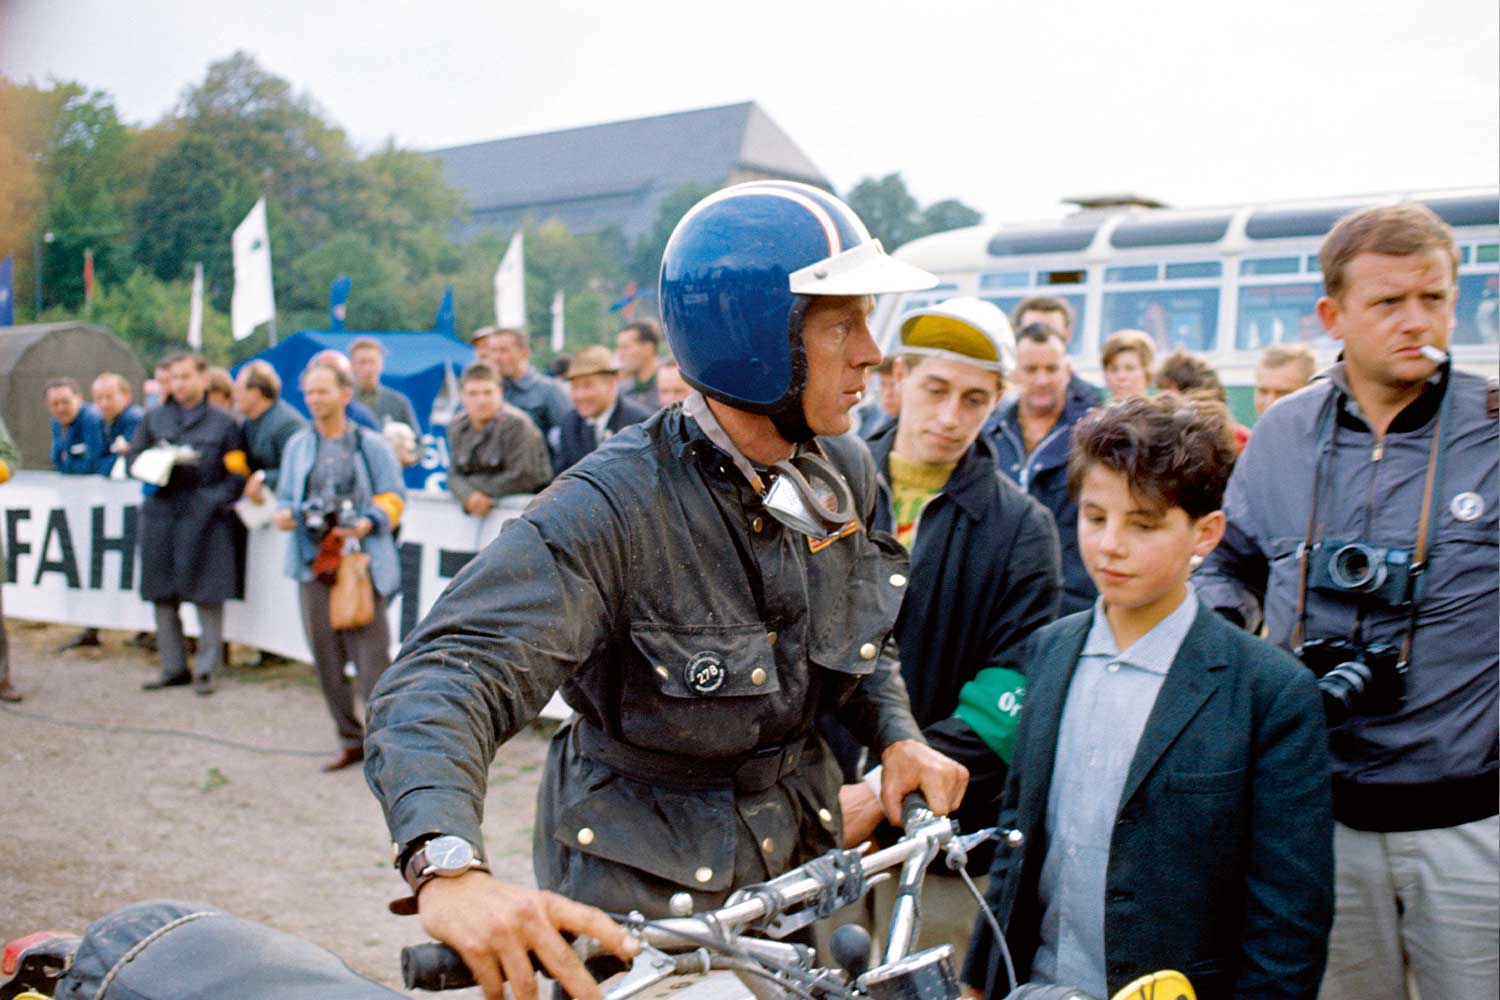 Erfurt, East Germany (GDR), September 1964: Motocross World Championship (enduro): Steve McQueen, flag bearer of the American delegation, participates in the Six Days of Erfurt on a Triumph 750 cm3 motorcycle , number 278. He himself financed the team of the United States, composed with biker friends: here, the helmeted actor walking while holding his motorcycle during an arrival. (Photo by Francois Gragnon / Paris Match via Getty Images)